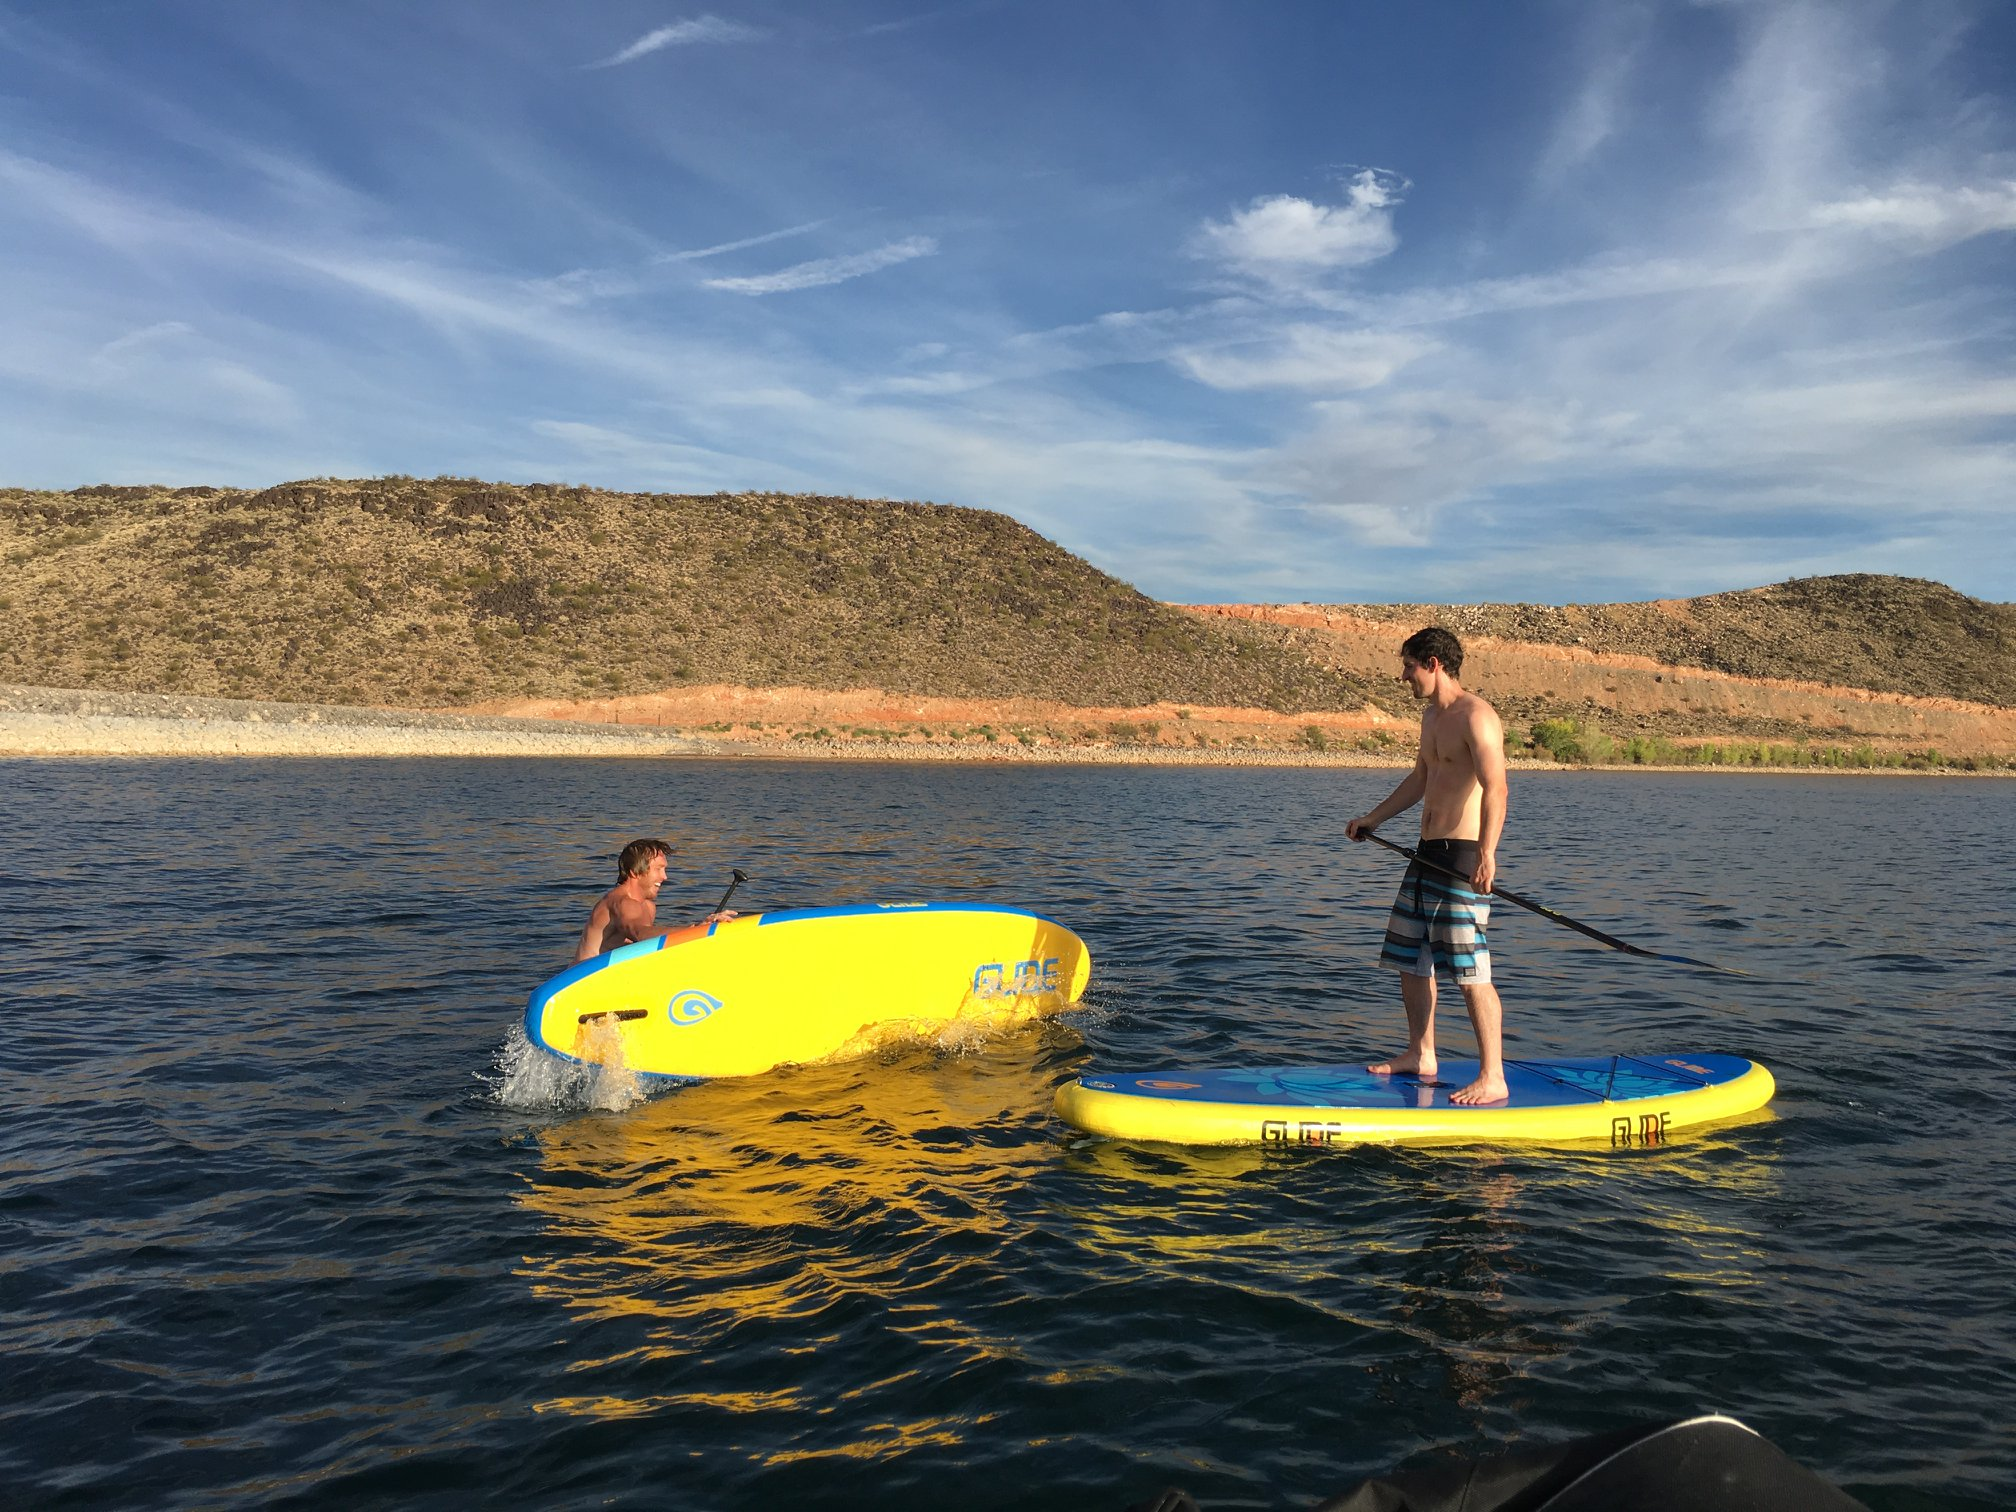 having fun on a paddleboard can mean falling off the paddle board 